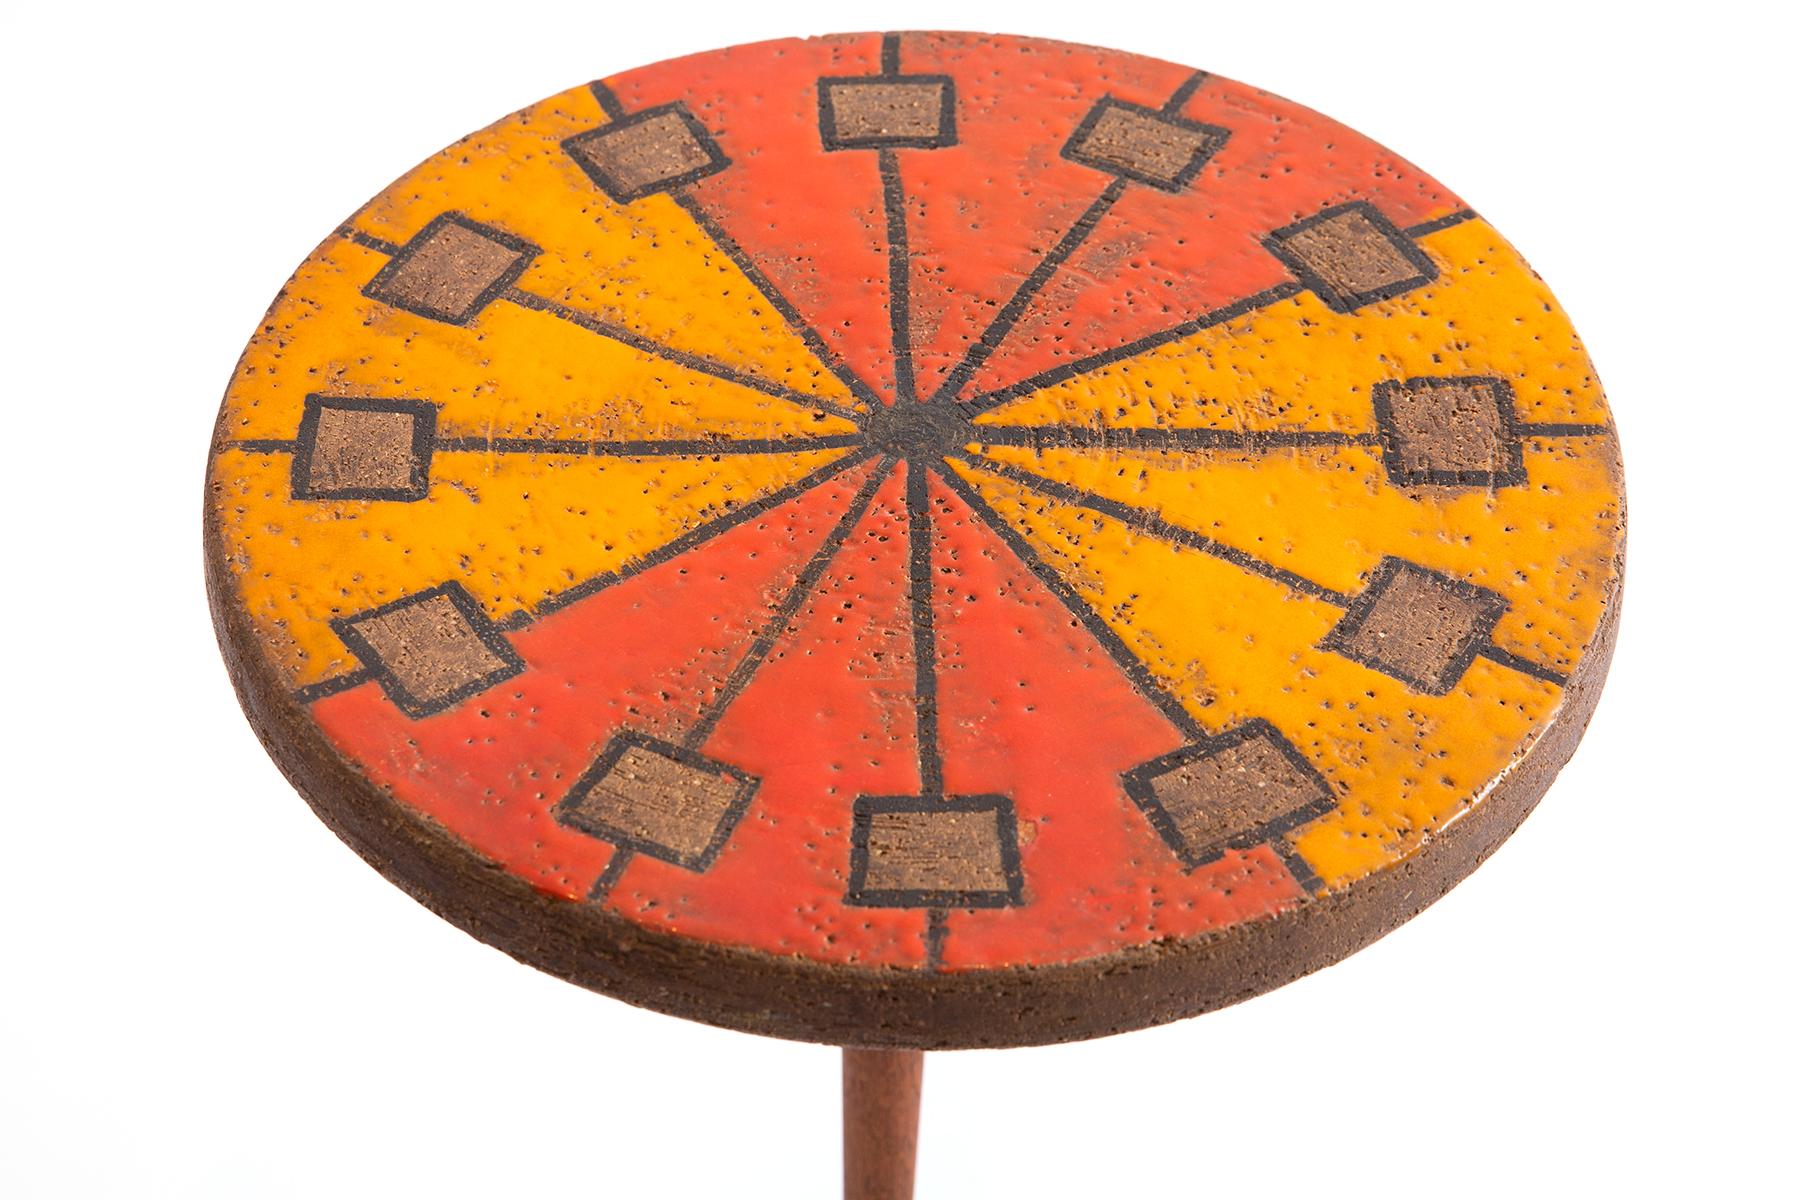 Aldo Londi for Bitossi ceramic iron and teak side table, circa late 1960s. This seldom seen example has a multi colored ceramic top with fluted teak stem and flared iron legs.